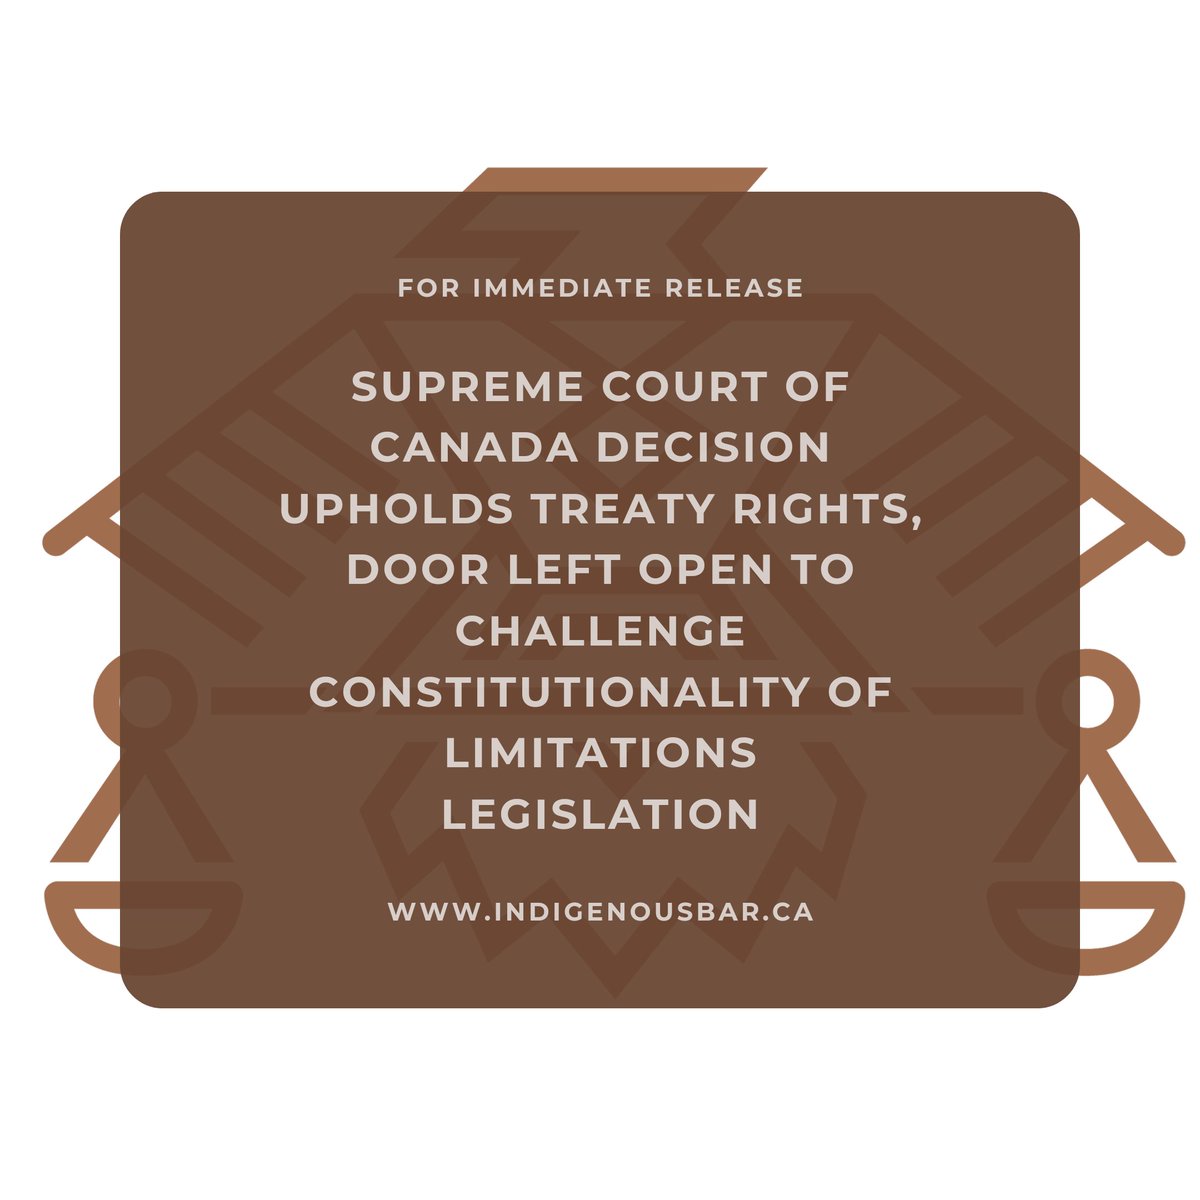 Today, the IBA acknowledges the decision handed down by the Supreme Court of Canada in Shot Both Sides v. Canada which reaffirms the enforceability of Treaty rights at common law. To read the full press release please visit our website indigenousbat.ca/press-releases